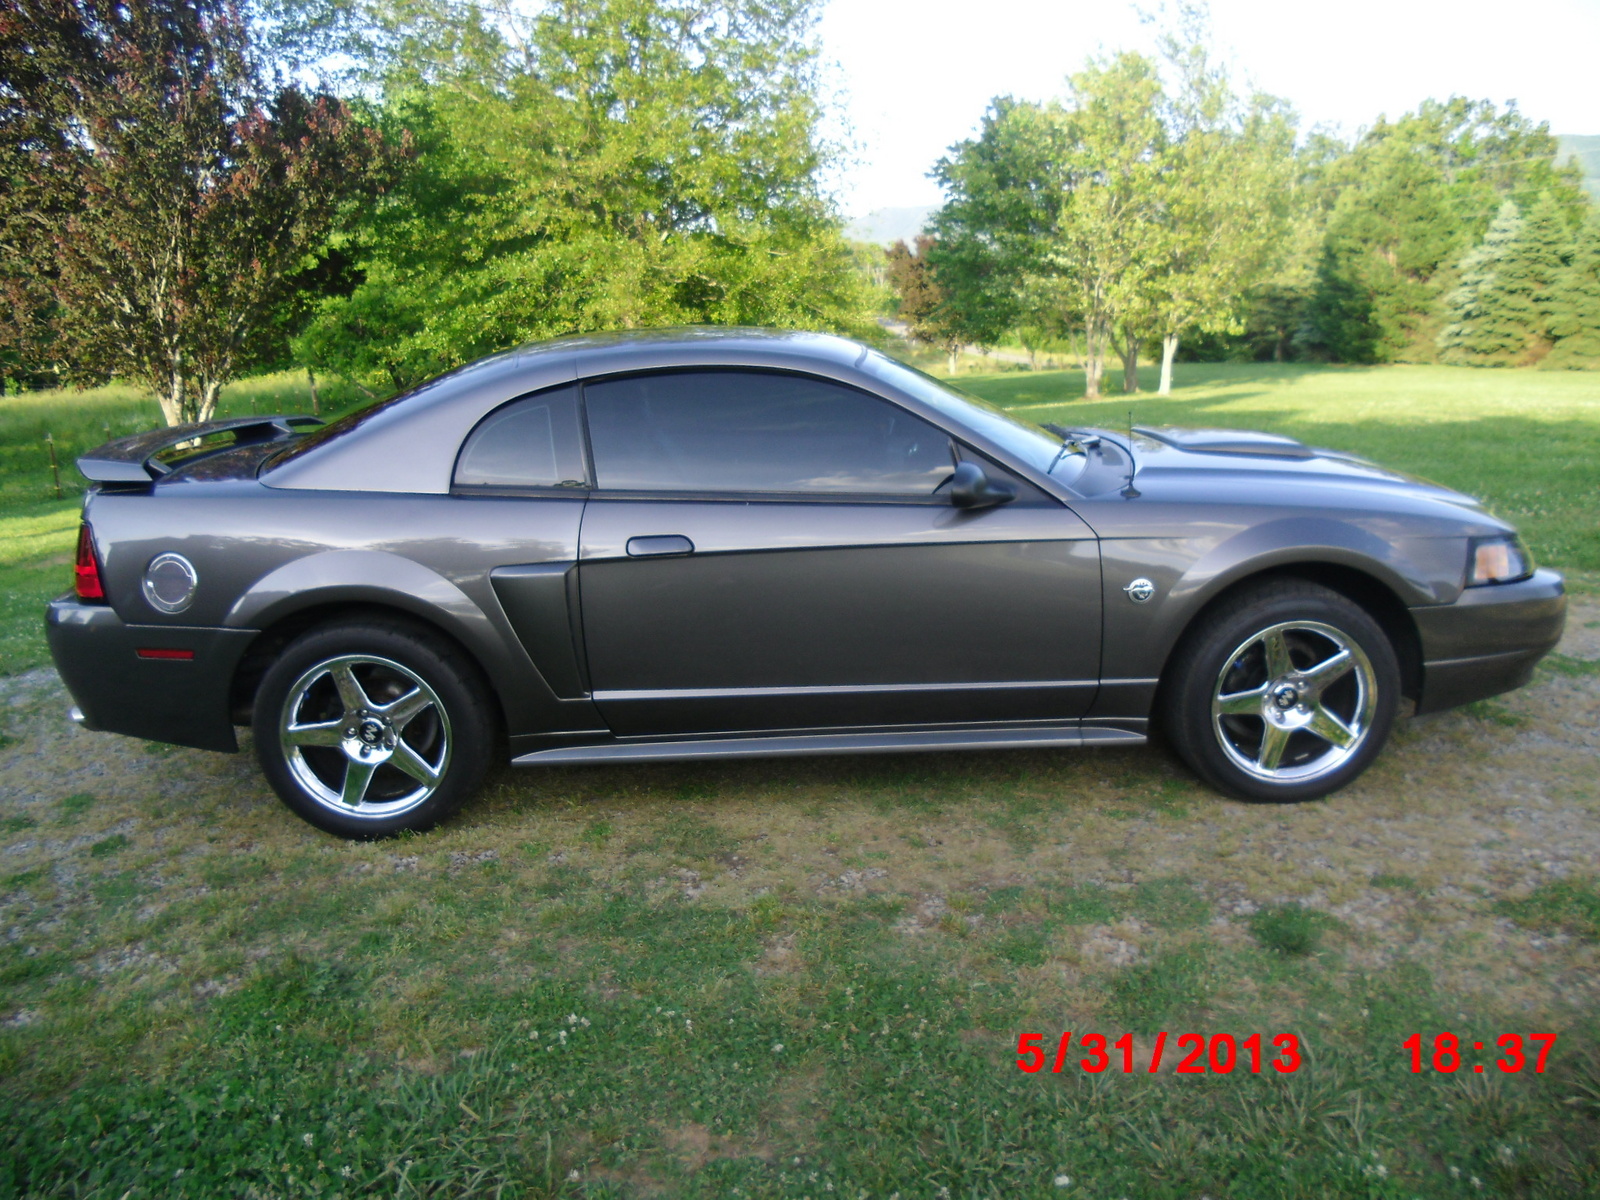 2004 Ford mustang gt deluxe specs #7